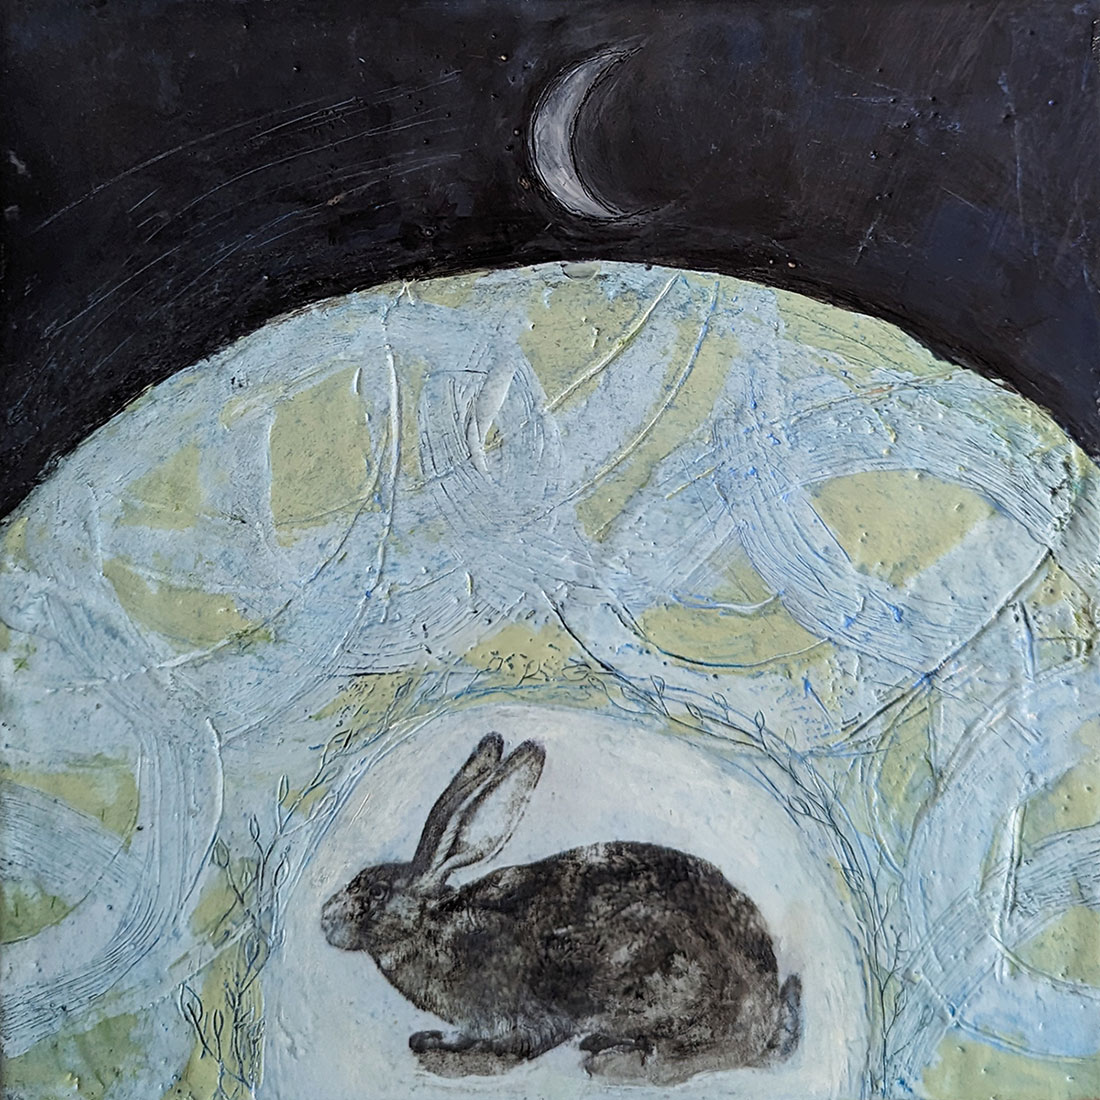 Time for Rest and Reflection, encaustic mixed media painting by Brigette Guerzon Mills